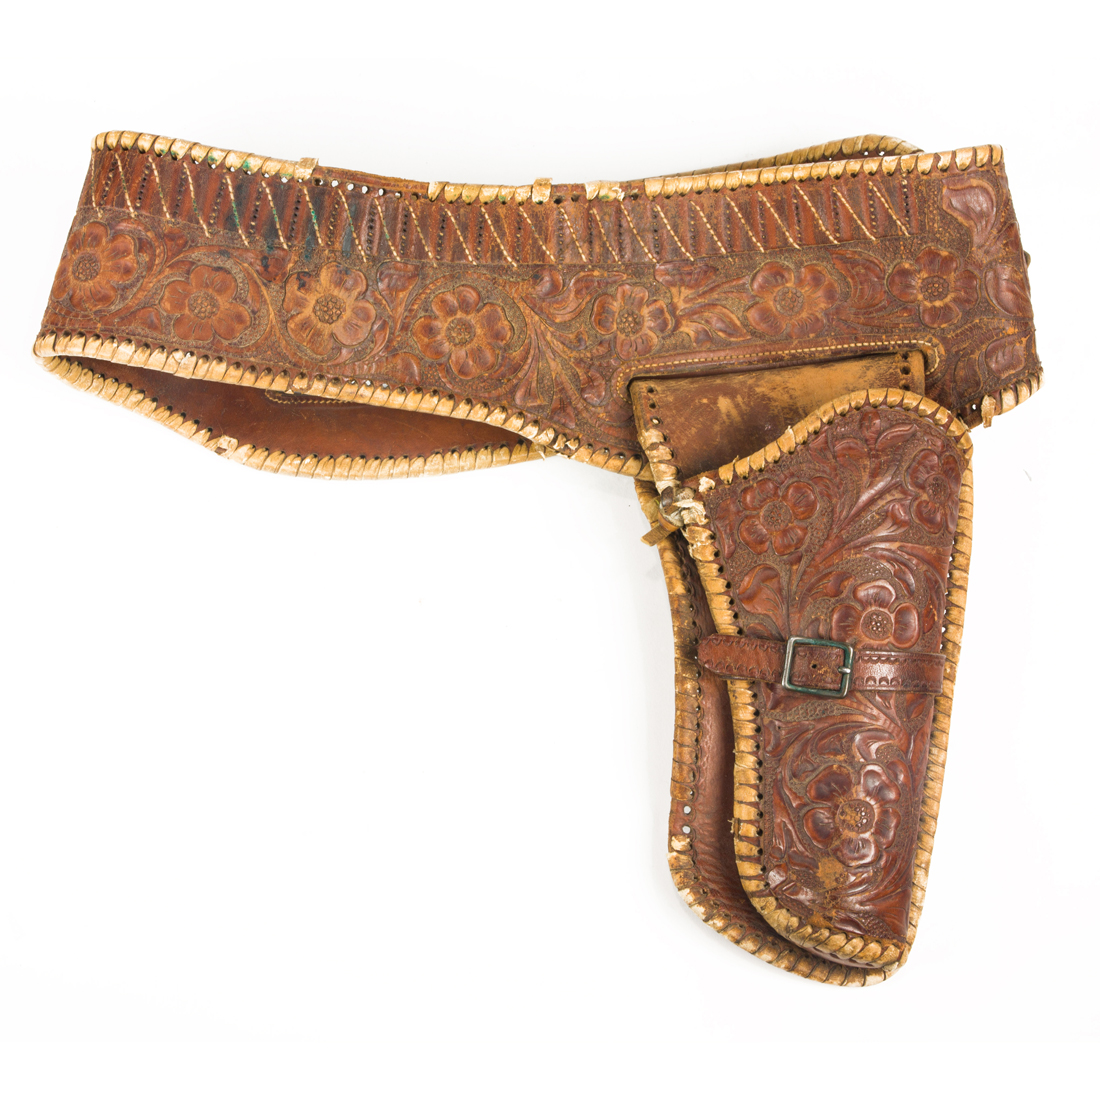 A MEXICAN TOOLED LEATHER HOLSTER 3a390a